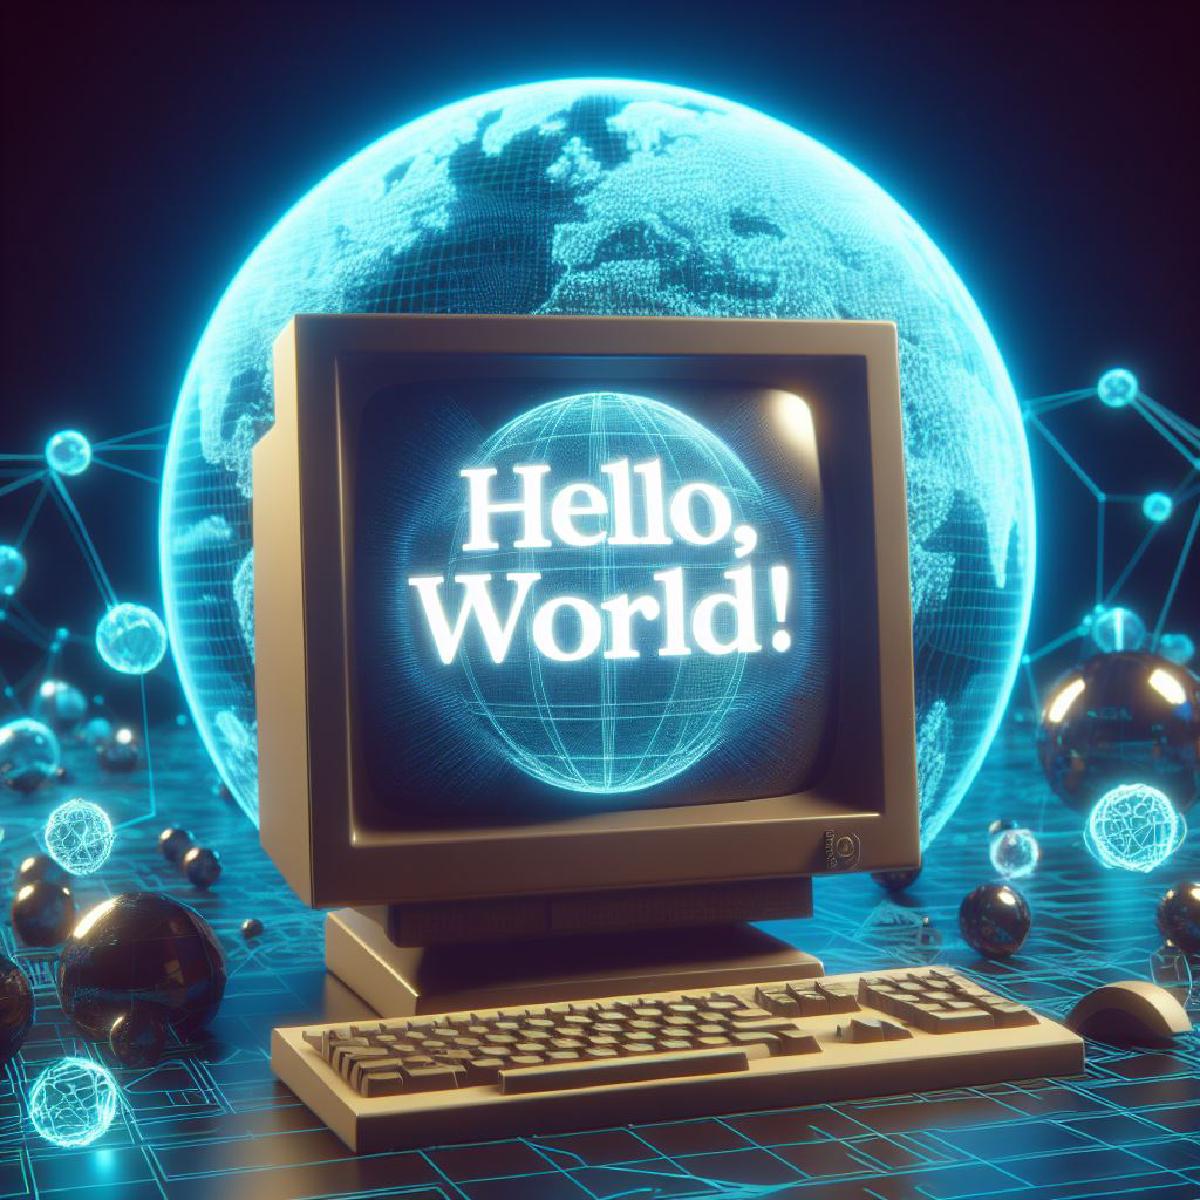 Hello World: An Introduction to my Blog